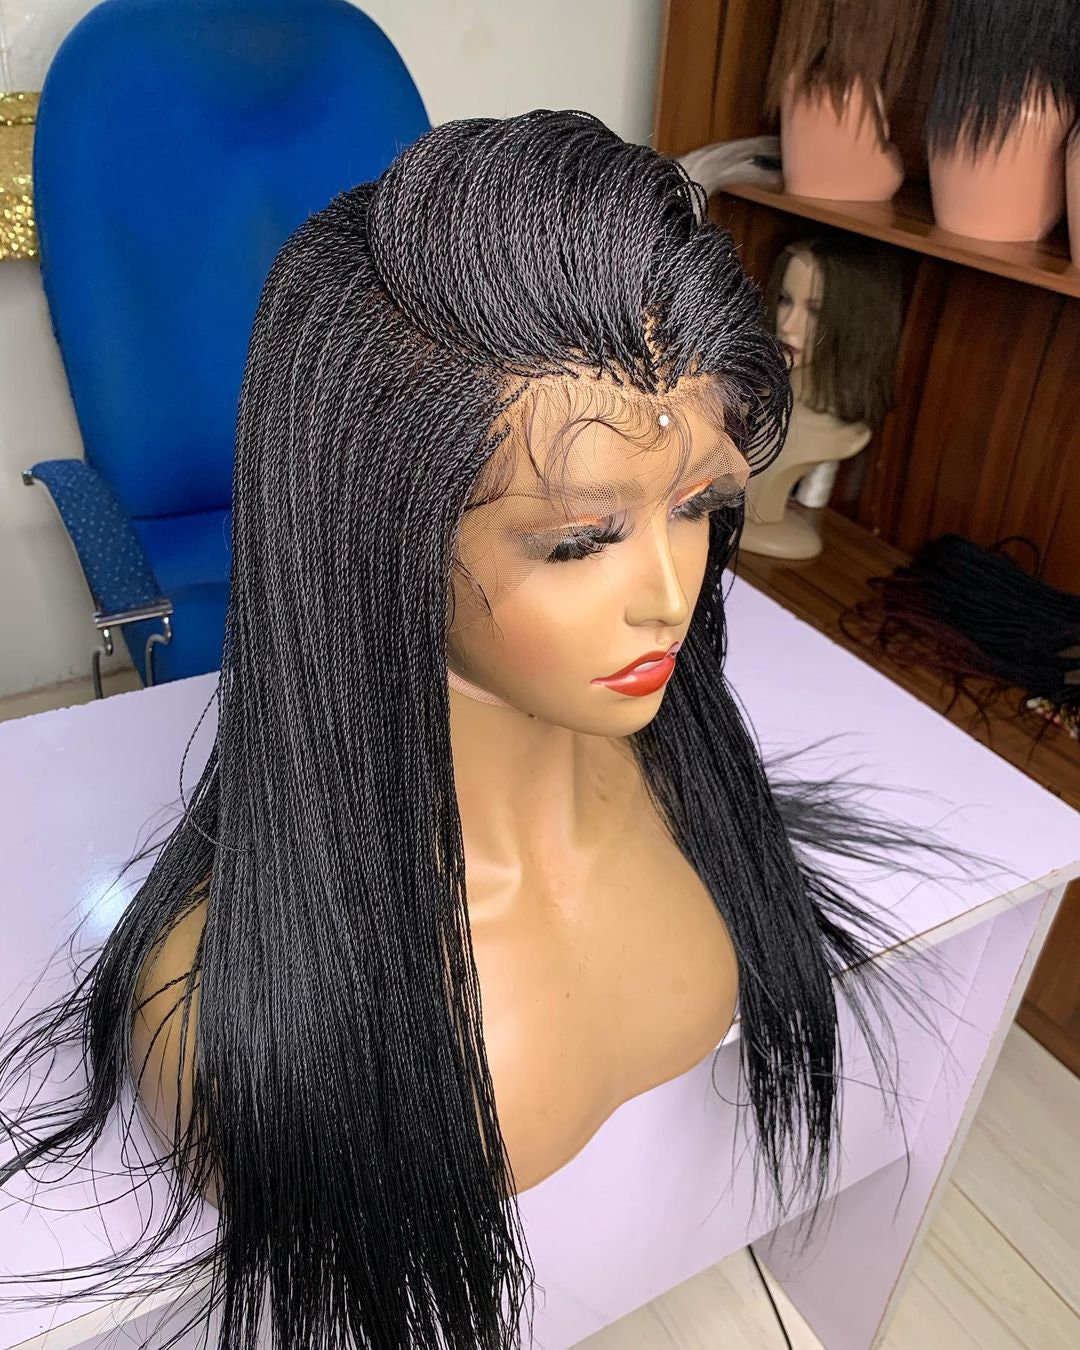 Lace Frontal Braided Wigs | Micro Box Braids - Express Wig Braids (41-60)inches Ankle Length / (4*4) Virgin Lace Closure